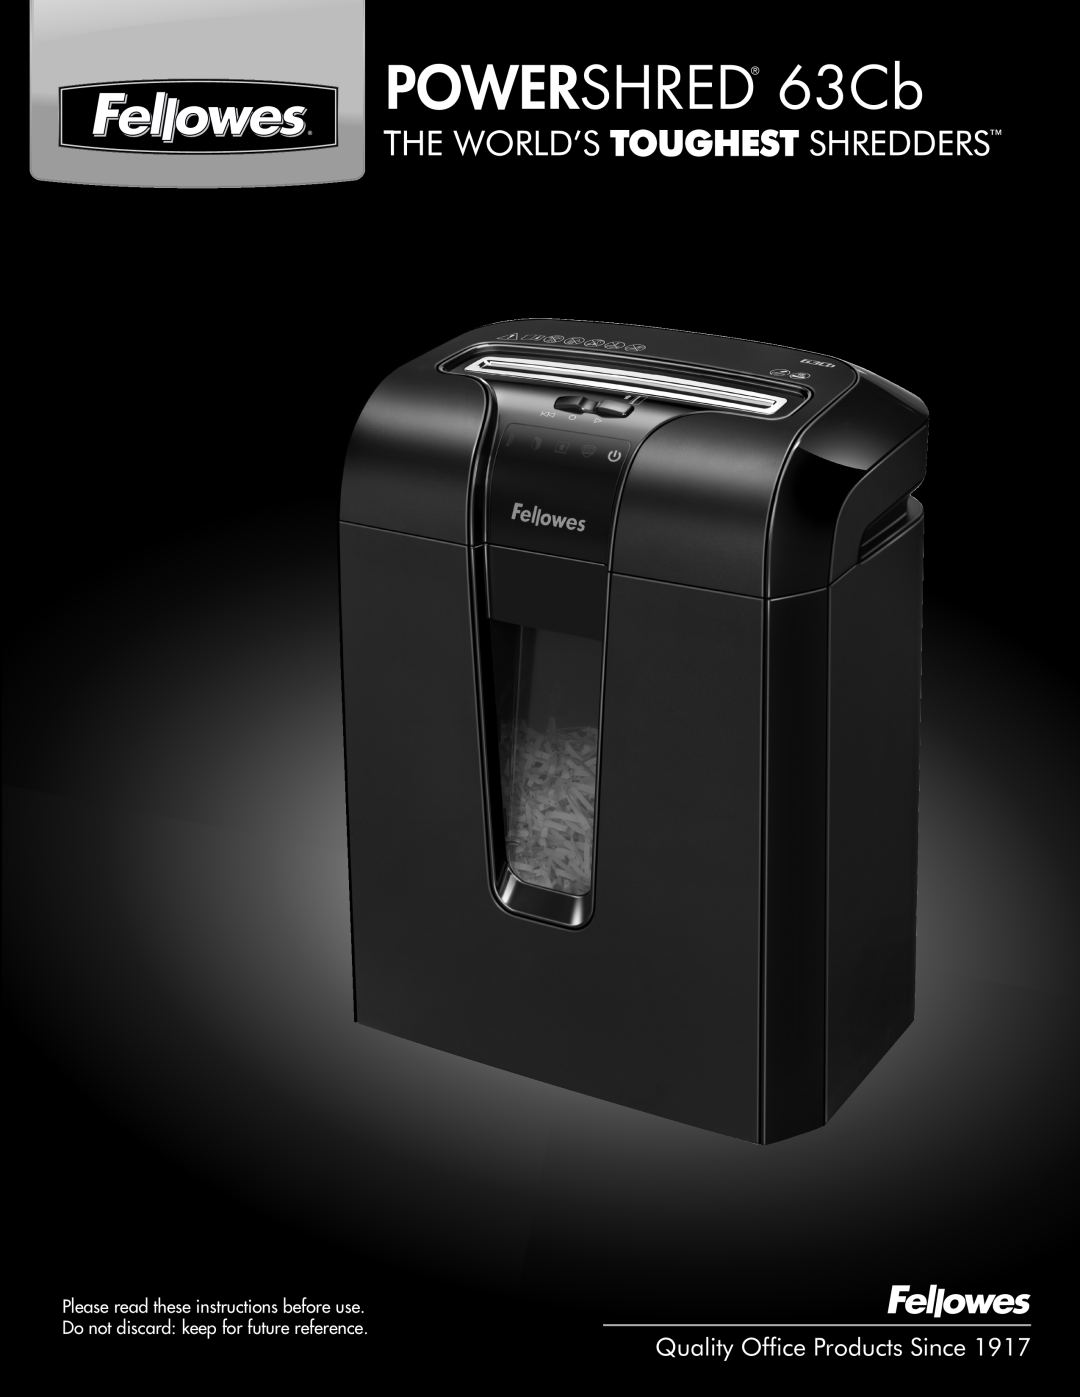 Fellowes 63cb manual POWERSHRED 63Cb, Quality Office Products Since 